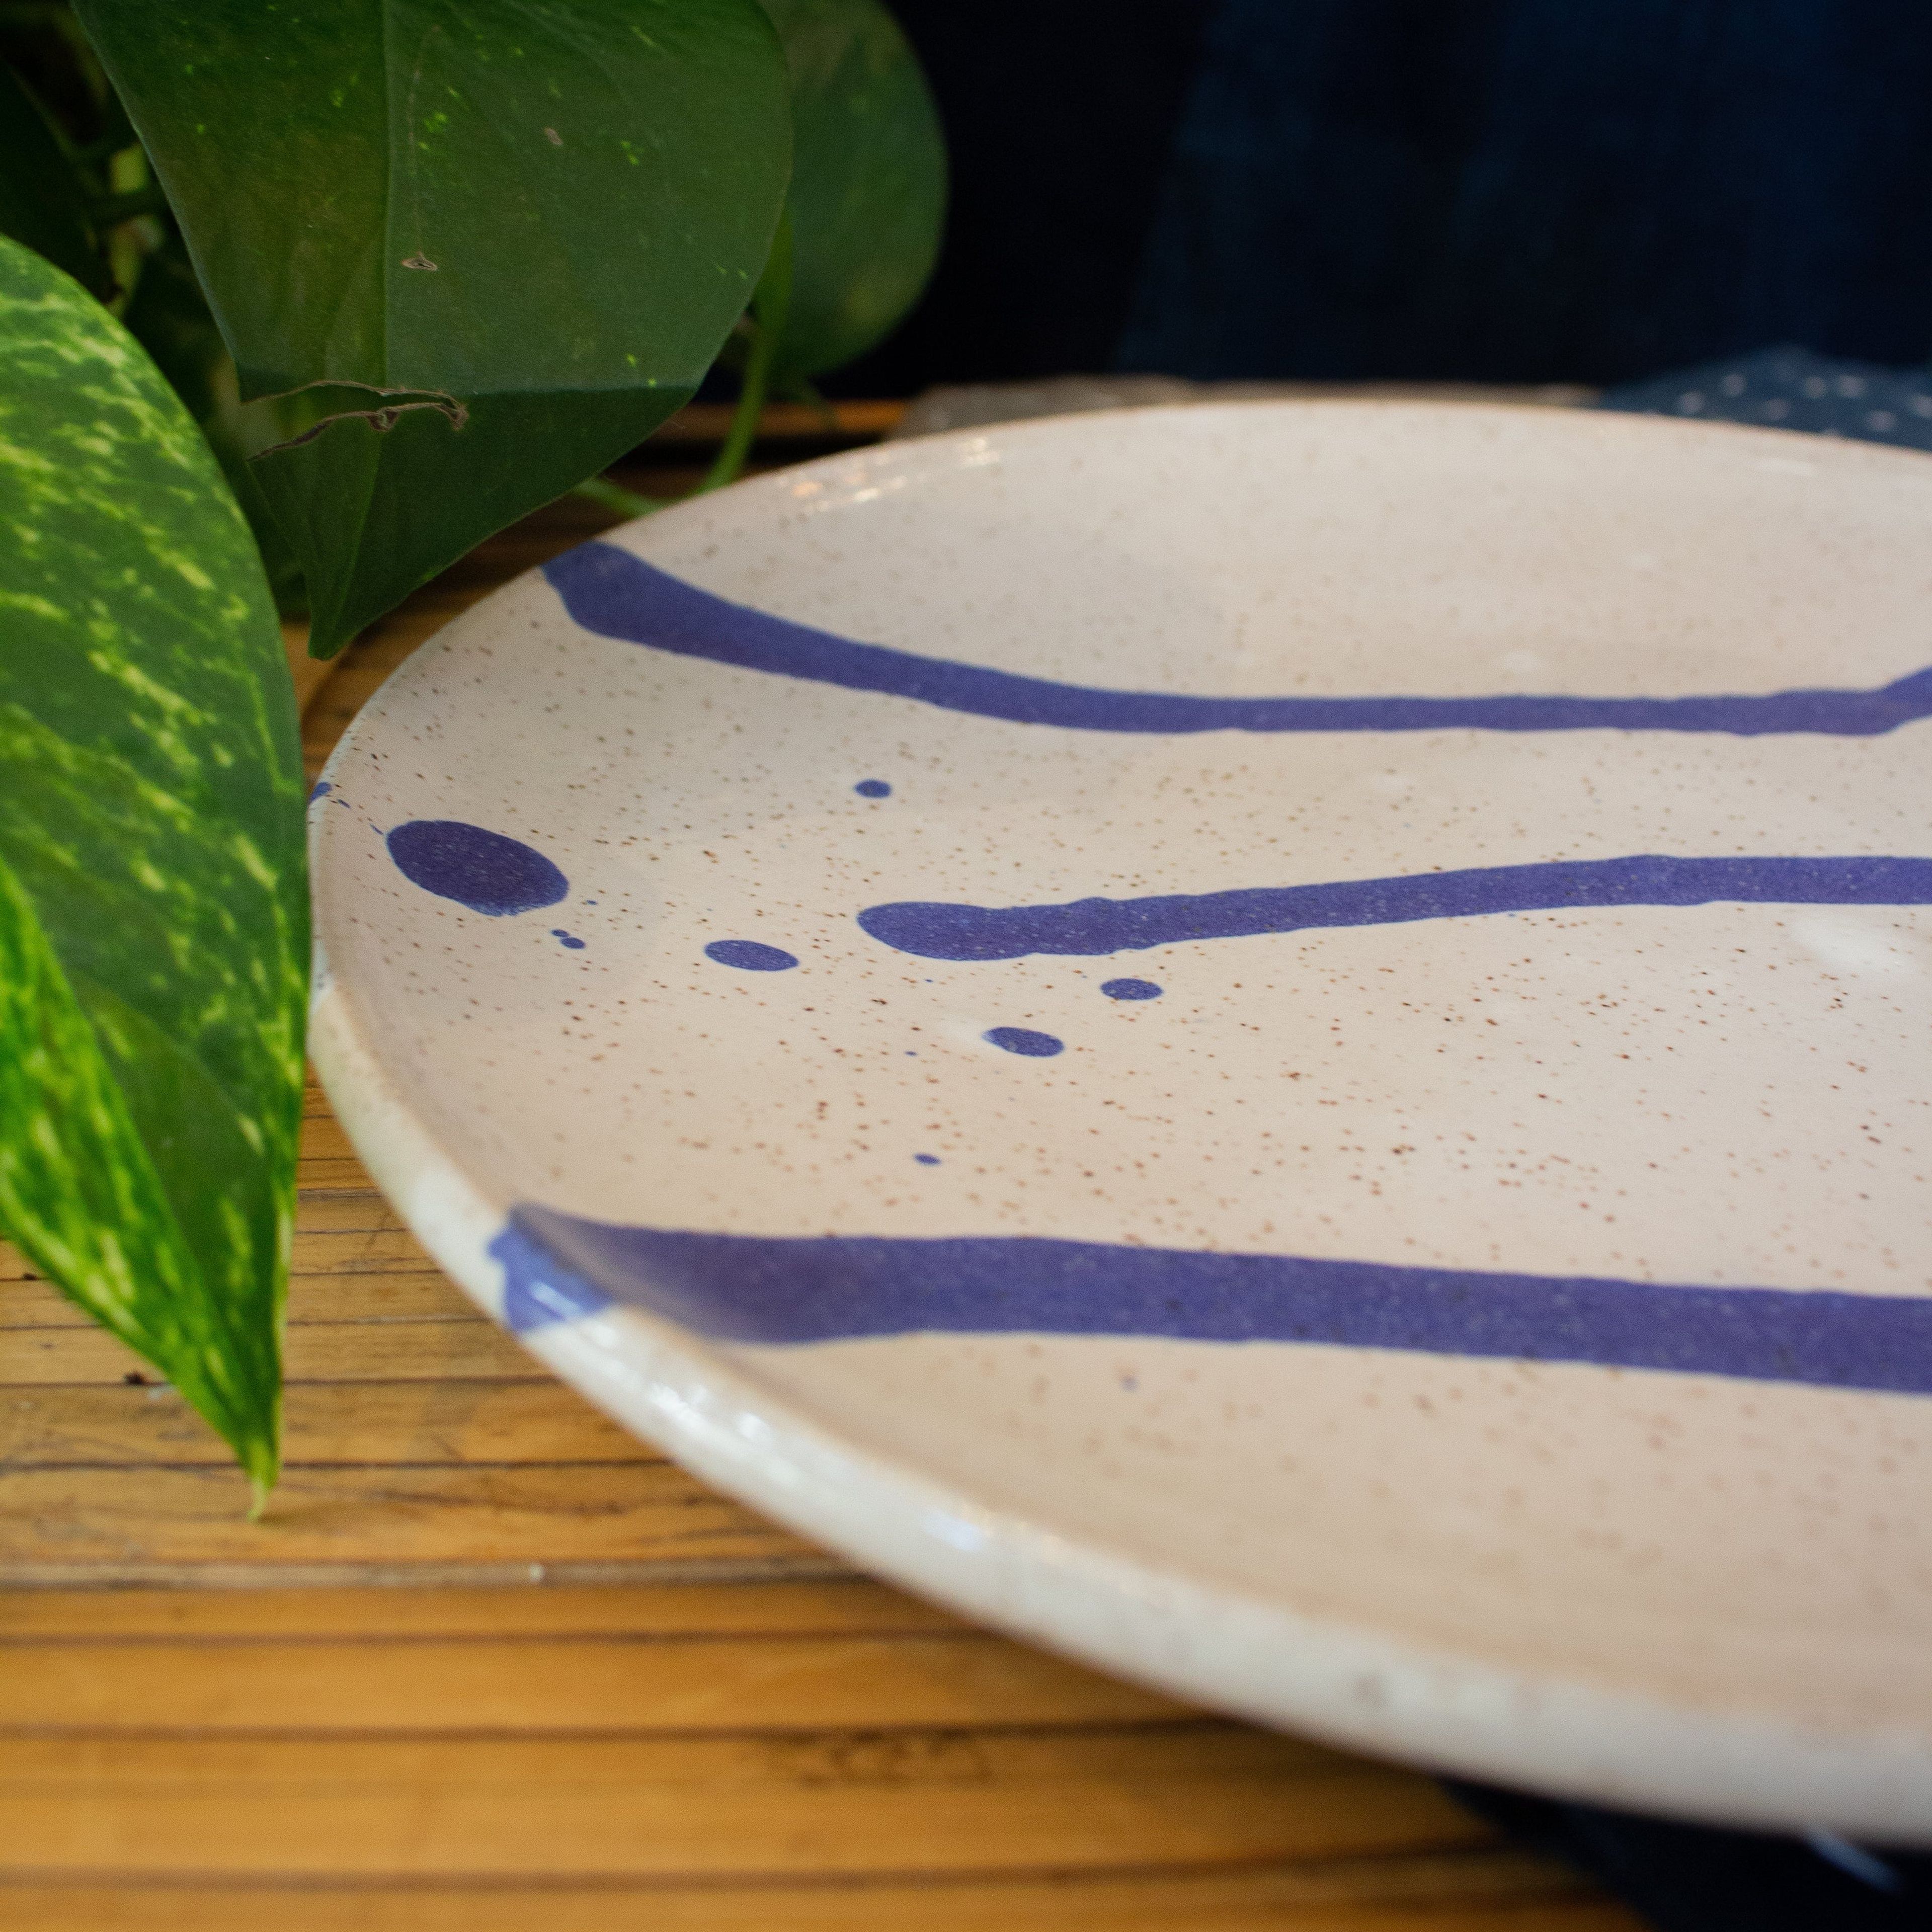 Almond Ave Pottery Plate, Vanilla Bean with Blue Stripes